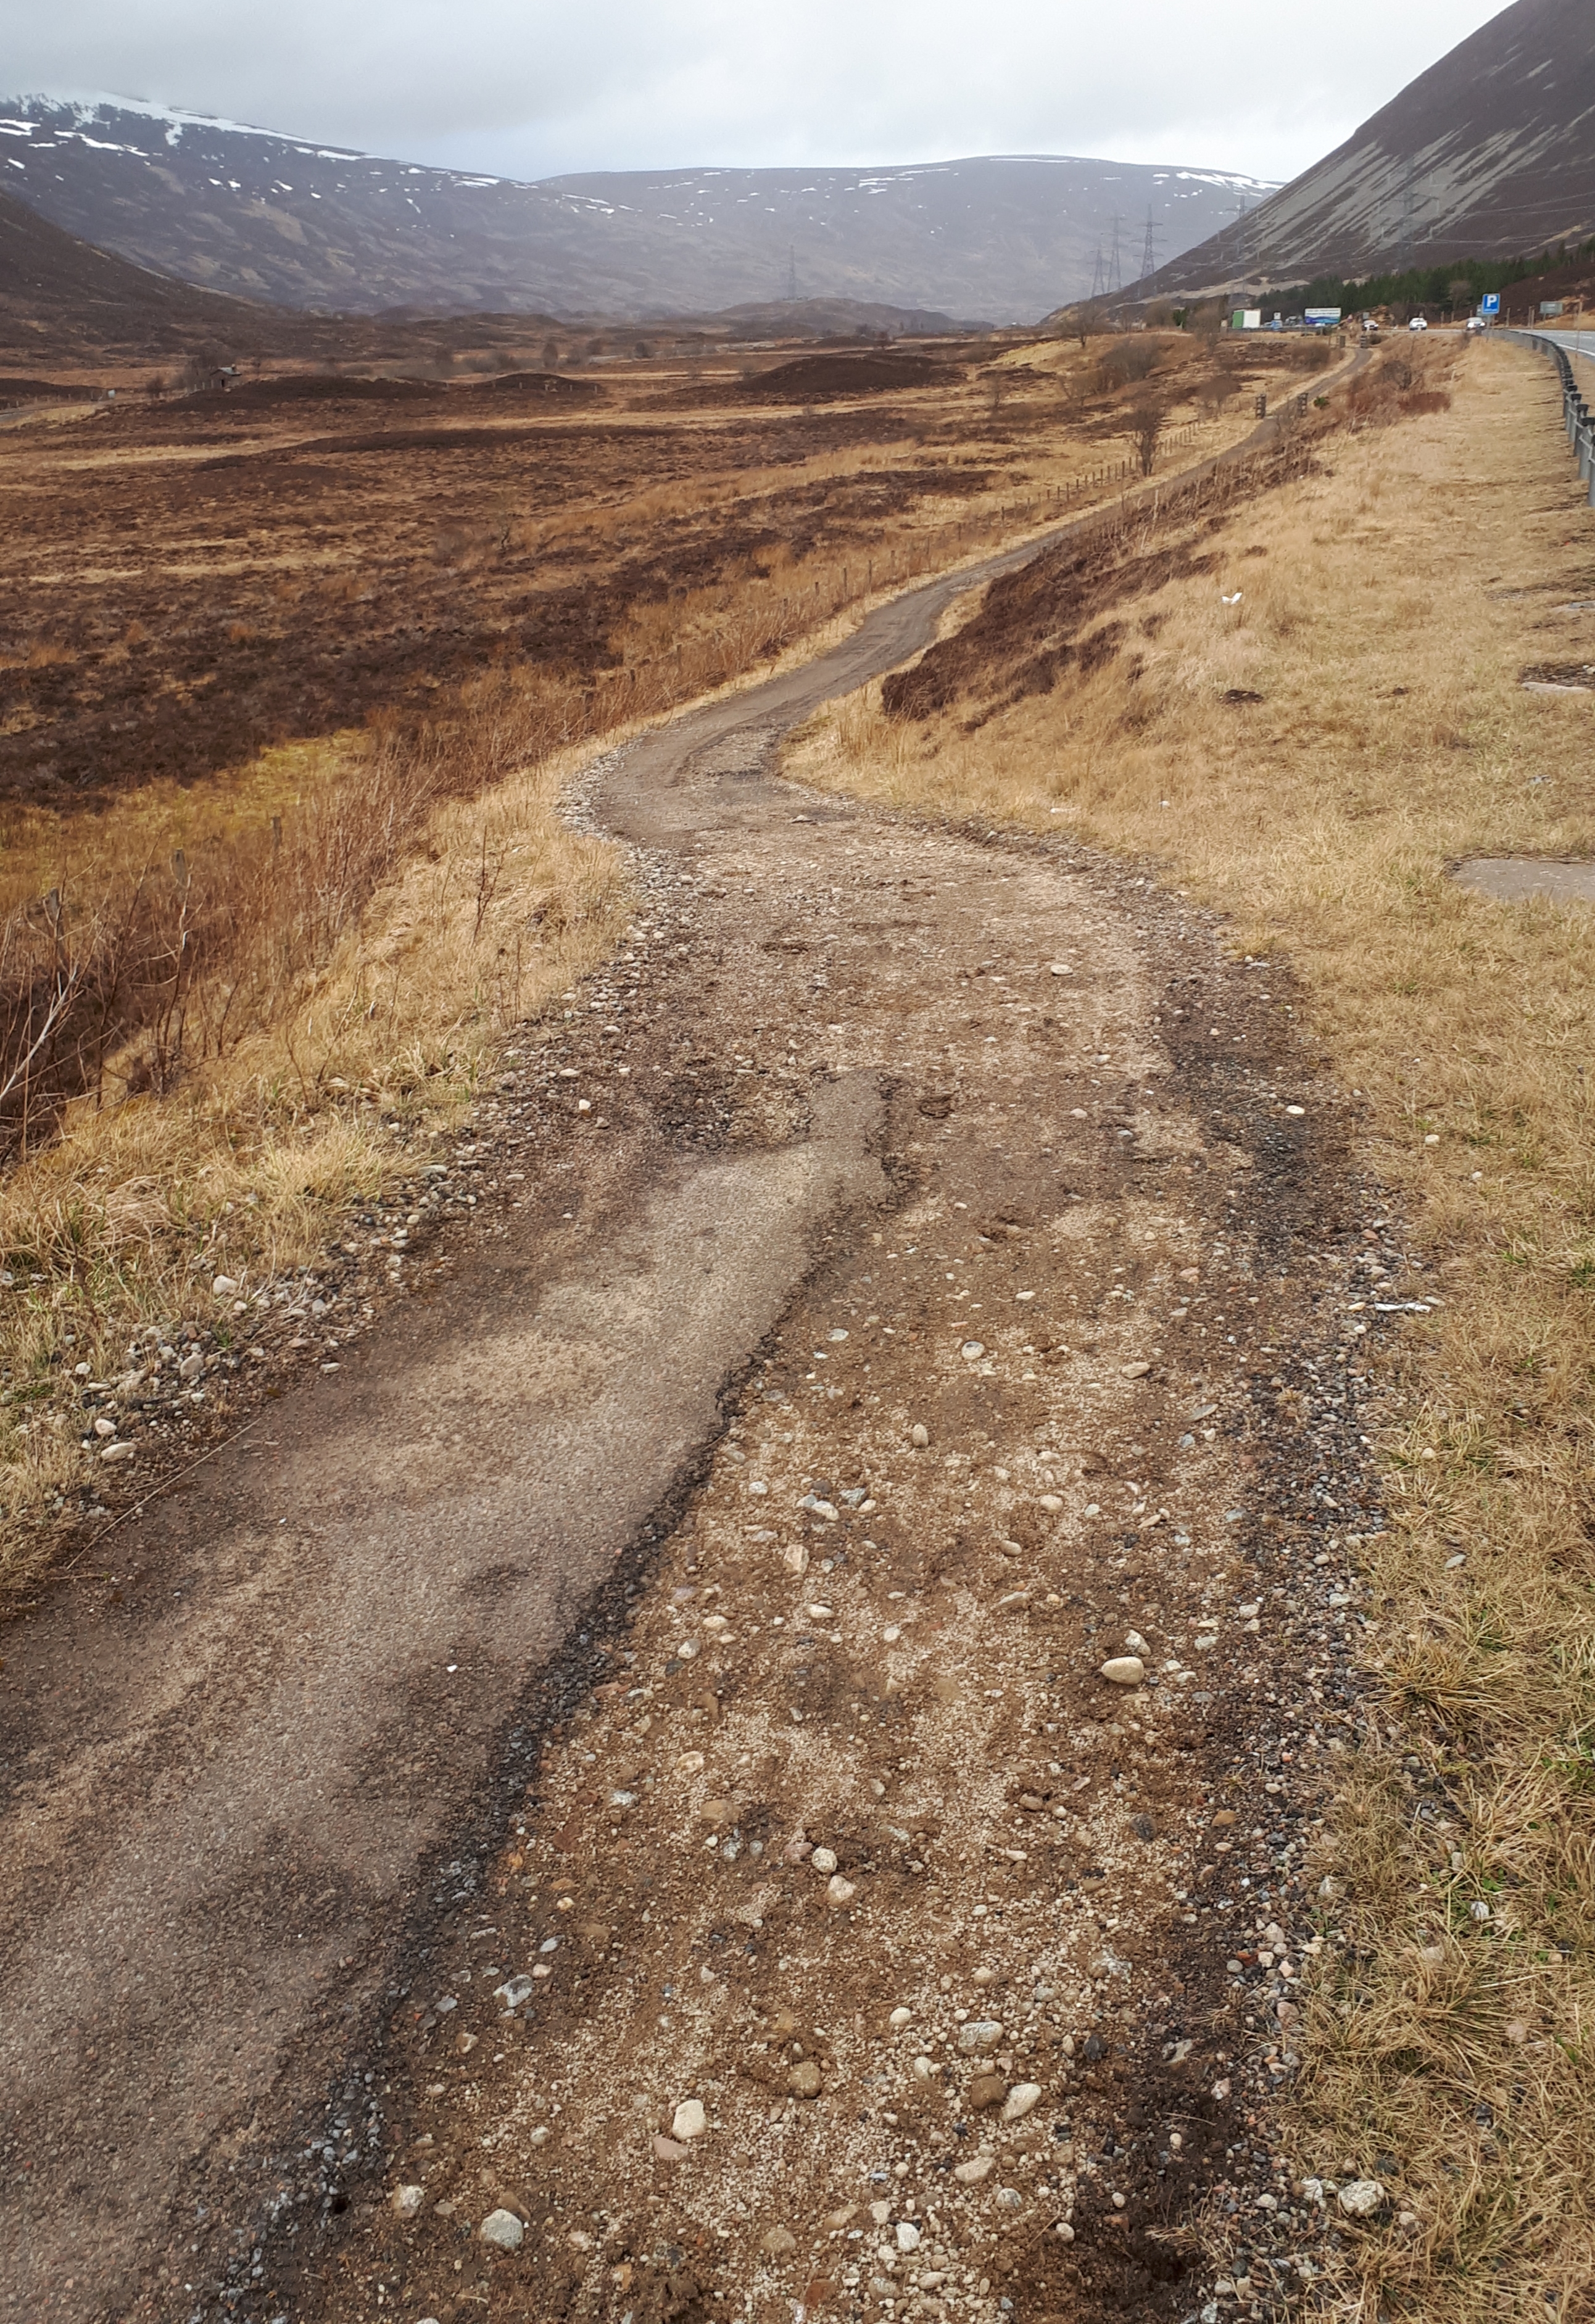 The cycle path at Dalnaspidal has been torn up by ATVs